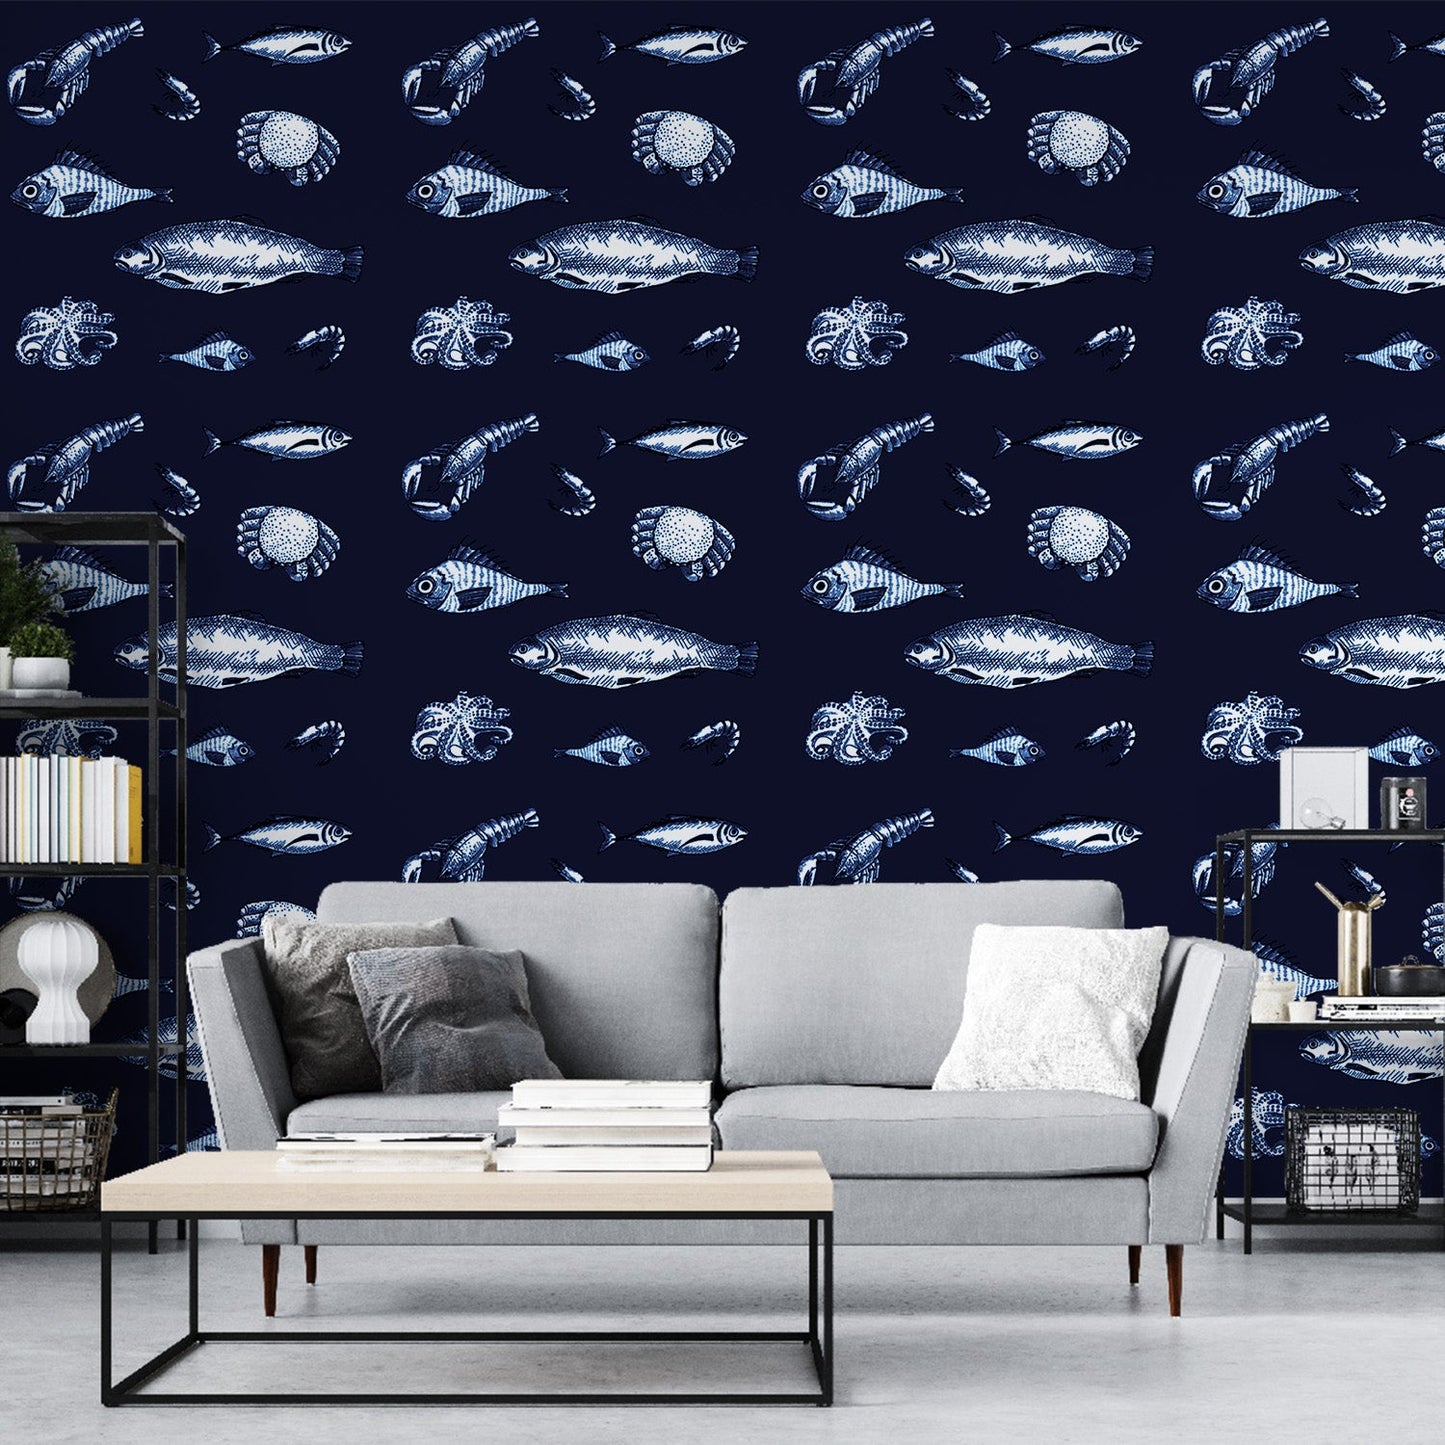 Fish Wallpaper | Crustaceans, Lobsters and Crabs